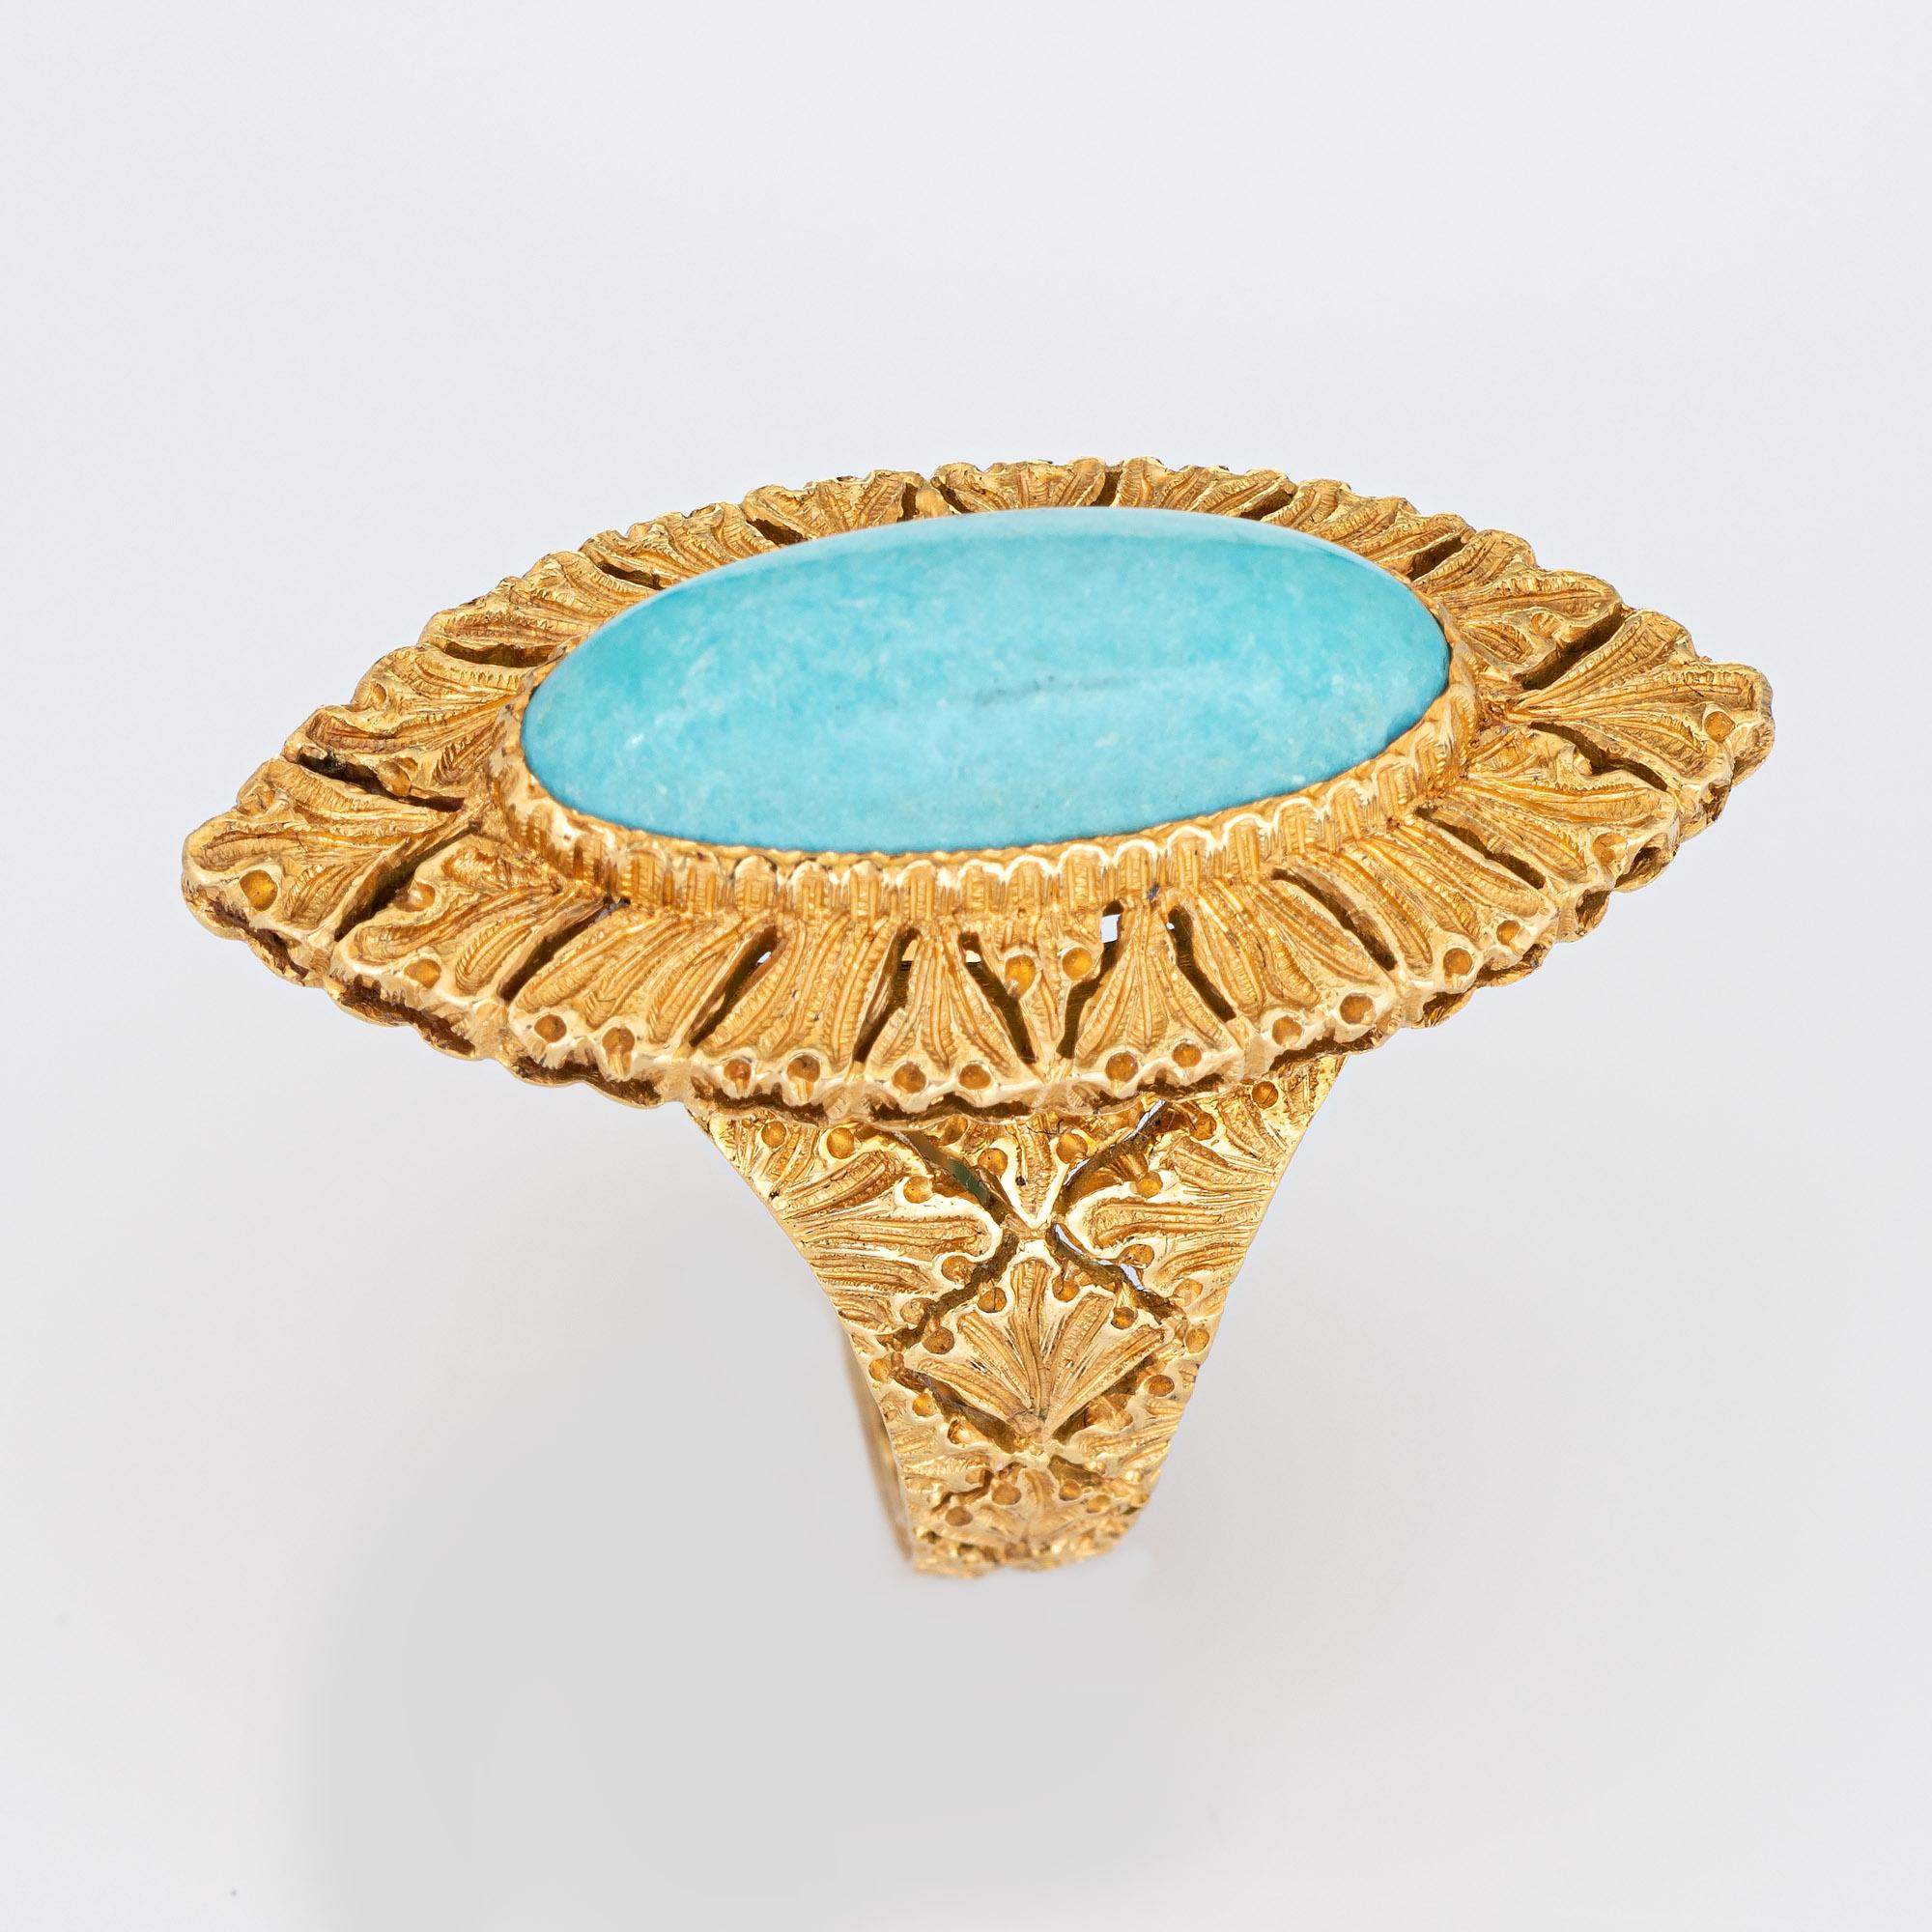 Stylish vintage Buccellati turquoise ring crafted in 18 karat yellow gold. 

Cabochon cut turquoise measures 18mm x 8mm (estimated at 6 carats). The turquoise is in very good condition and free of cracks or chips. 

Designed by the famed Gianmaria